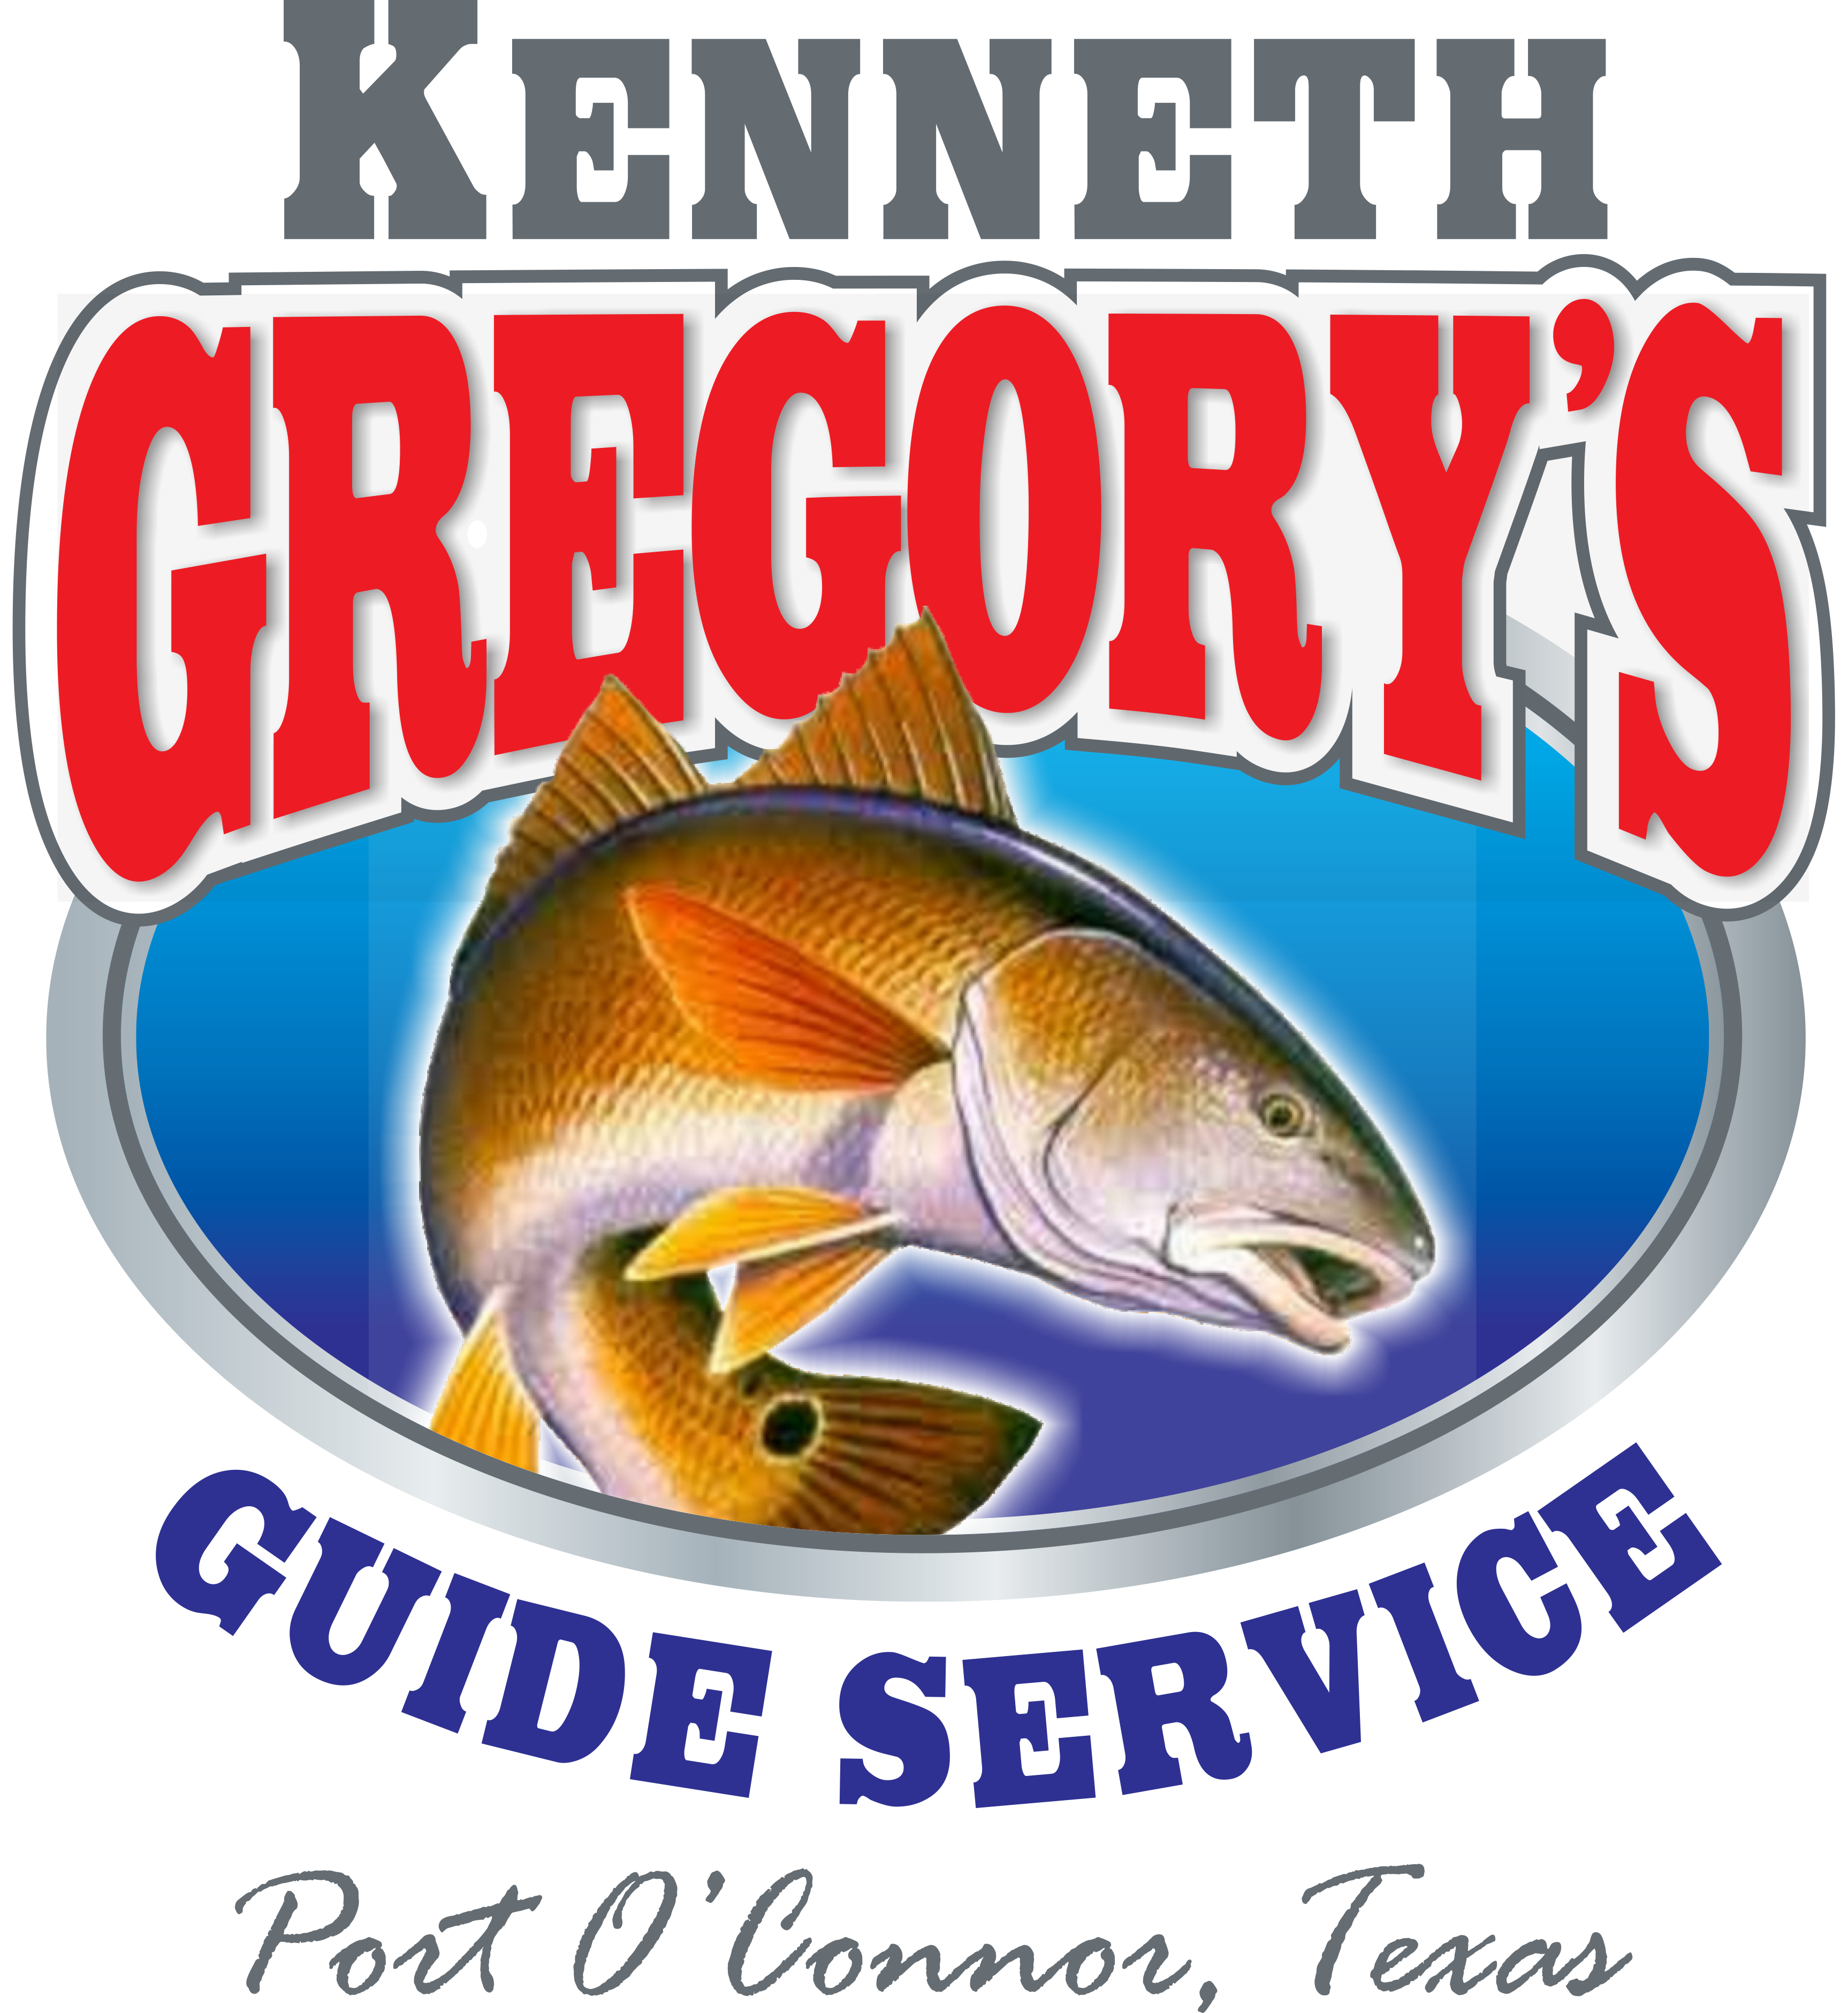 Kenneth Gregory Guide Service